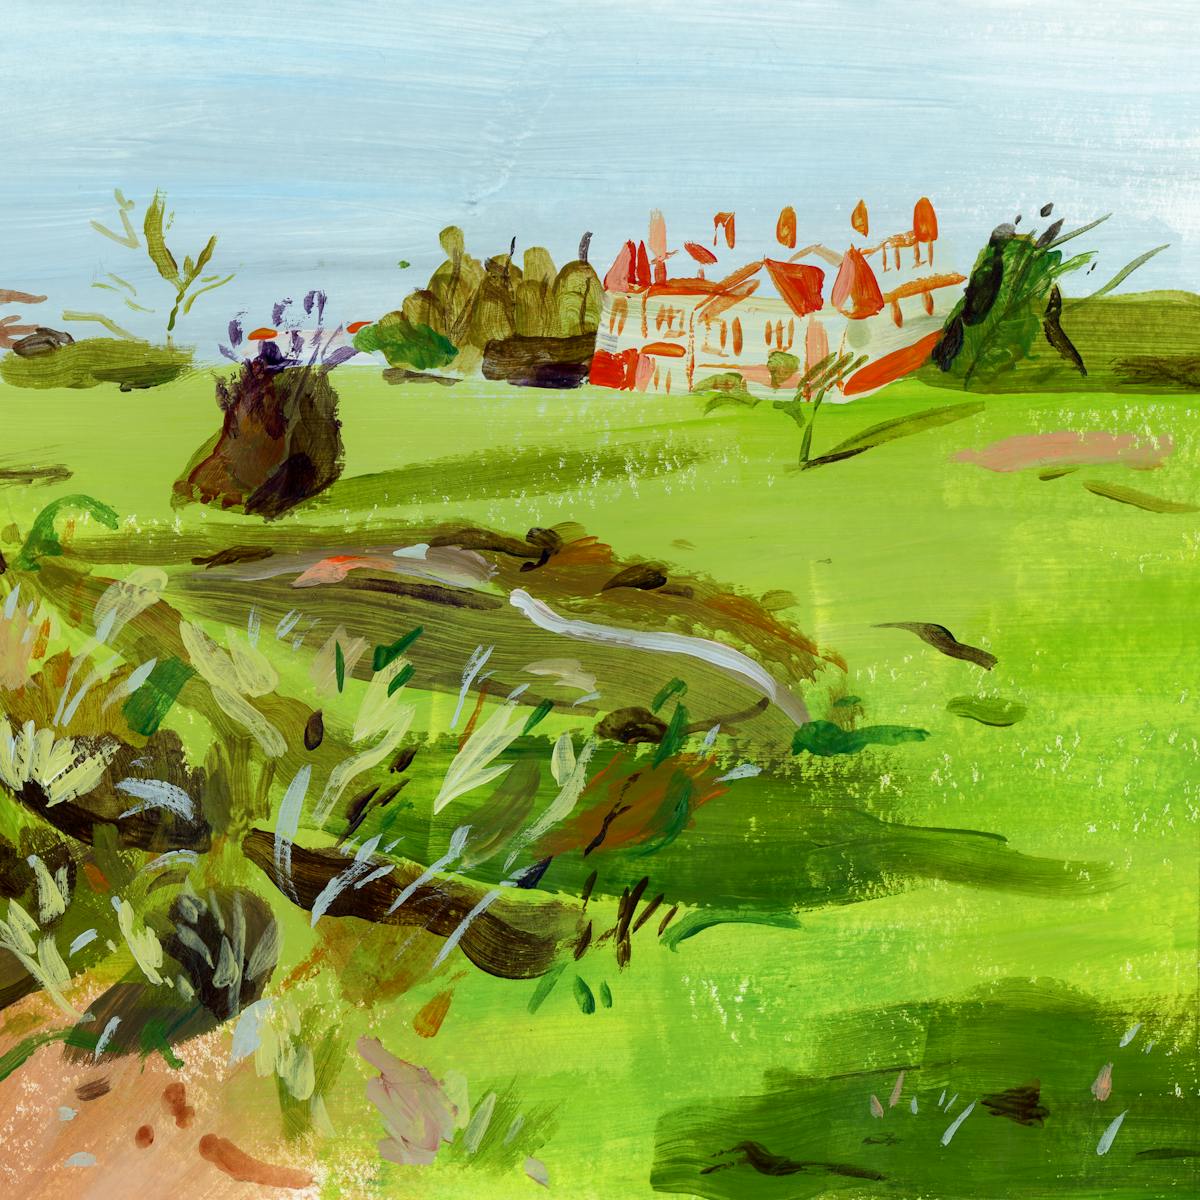 Painted artwork made with broad brushstrokes and impressionistic representational marks. The scene shows a coastal landscape with a sandy shorefront in the bottom left sweeping round across green grassland, peppered with shrubs and trees, to a red brick, pitched roof building in the top right distance. Surrounding the land is the blue of these and sky, merged together in continuous tone.